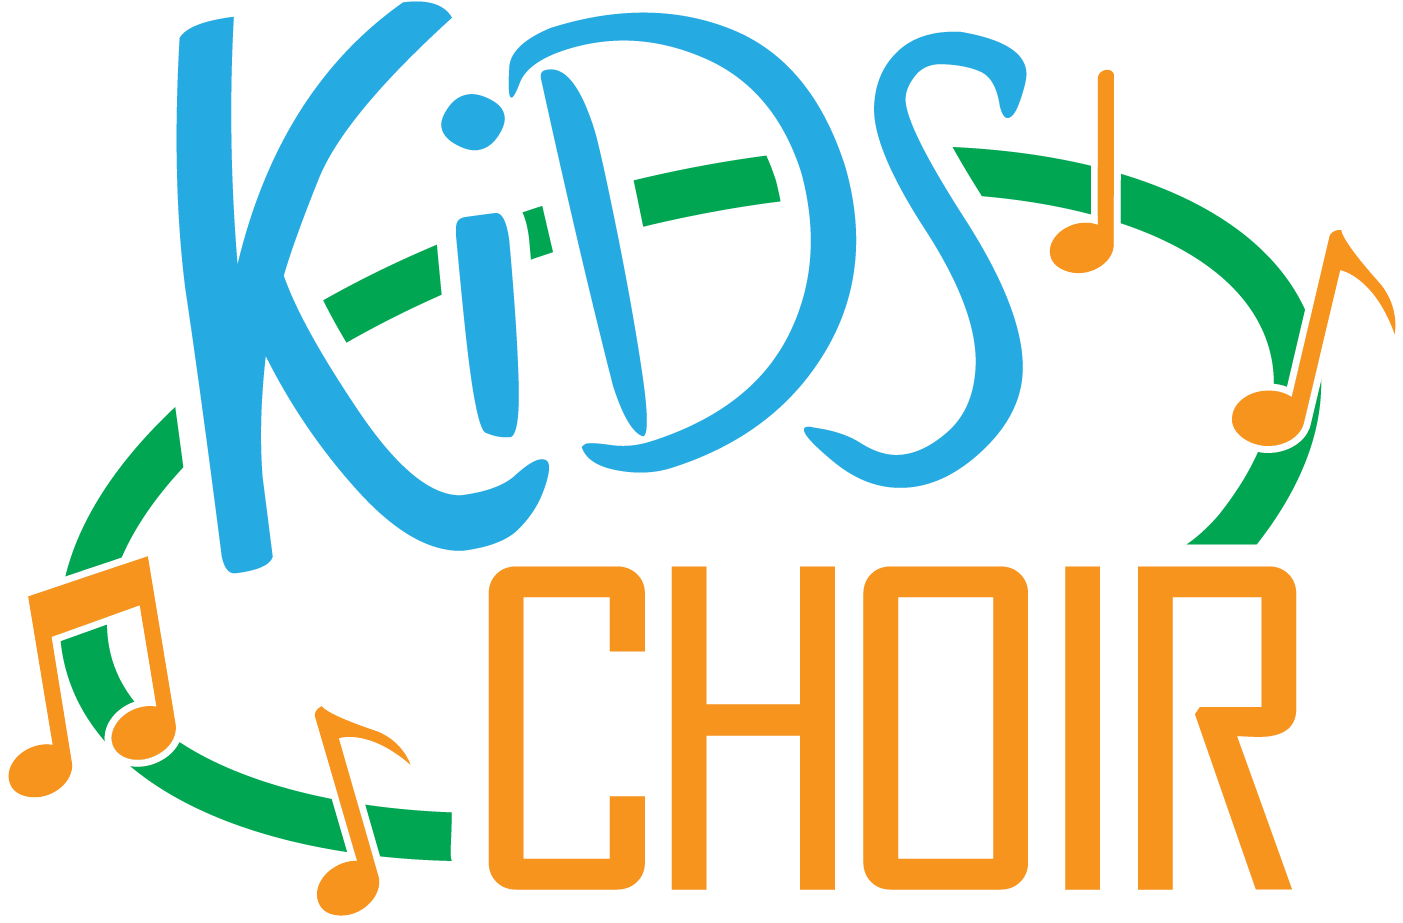 Choir For School Aged Children We Sing To Make A Difference - Kids Choir (1403x923)